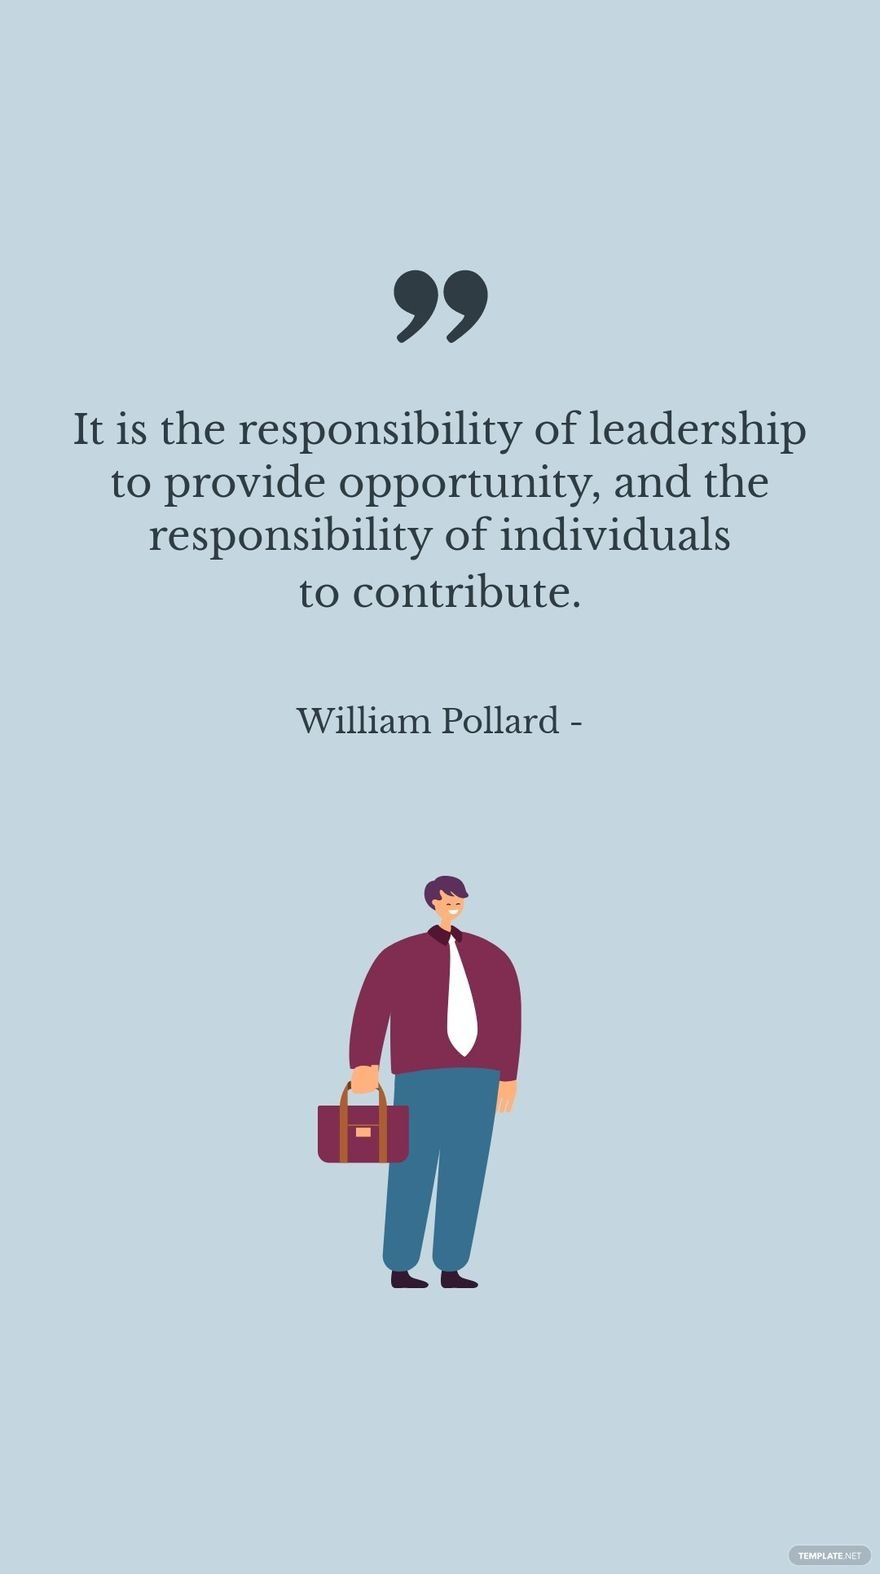 William Pollard - It is the responsibility of leadership to provide opportunity, and the responsibility of individuals to contribute.